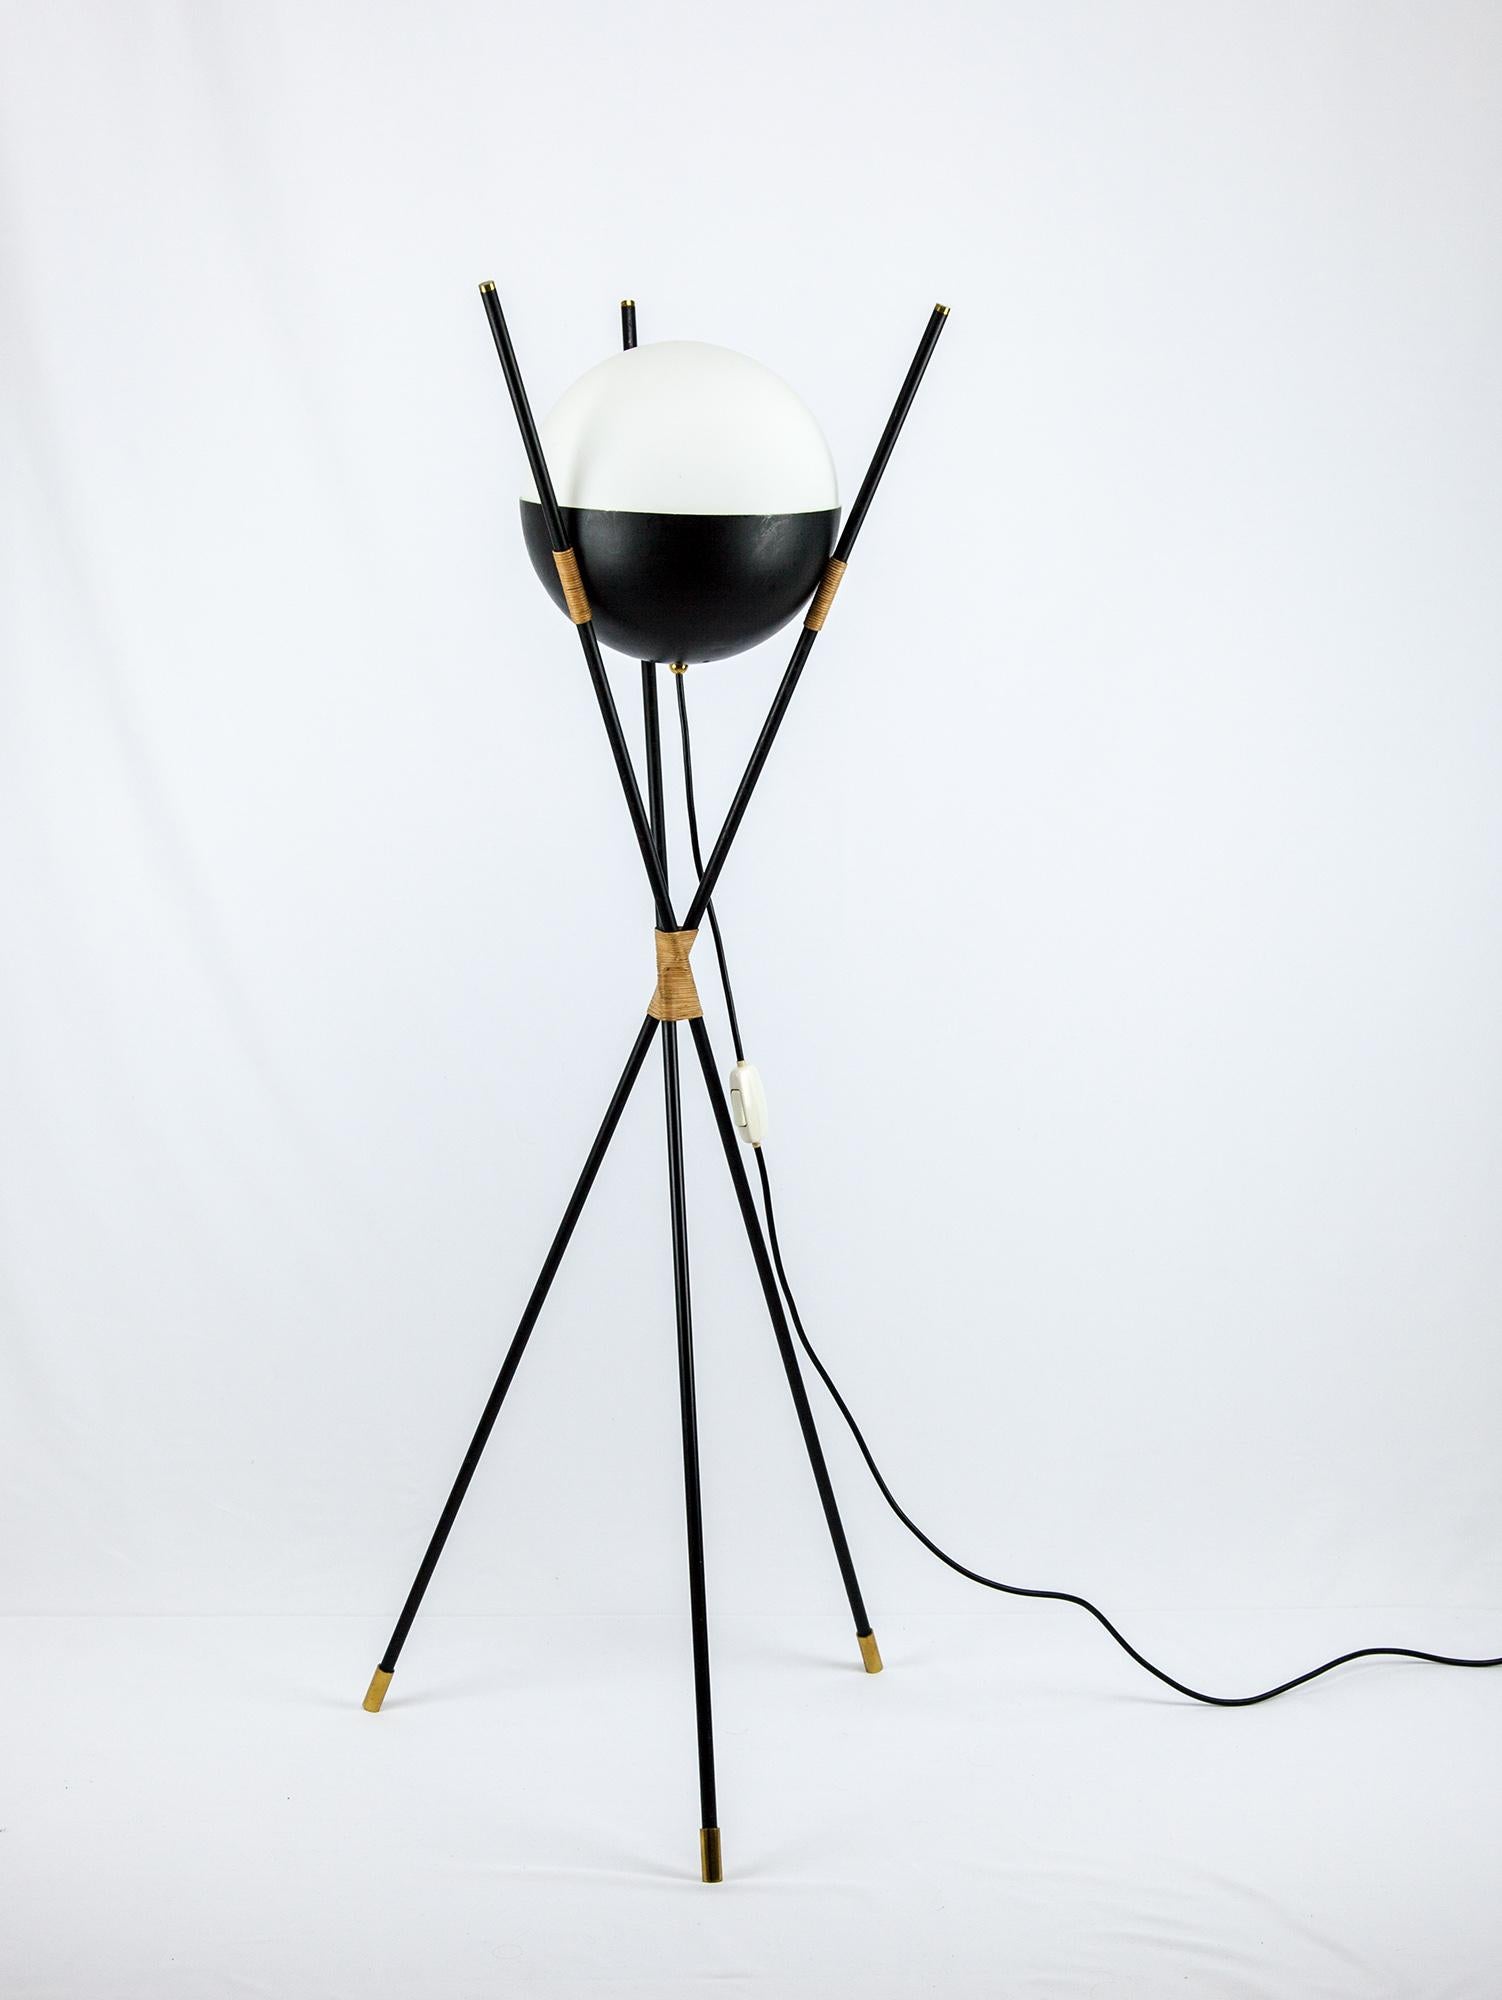 Vintage tripod floor lamp by Angelo Brotto for Esperia. The striking form of the tripod floor lamp with its opaline glass shade is the epitome of modernist design. The sharp clean lines, the geometric shape of the shade and its minimal colour